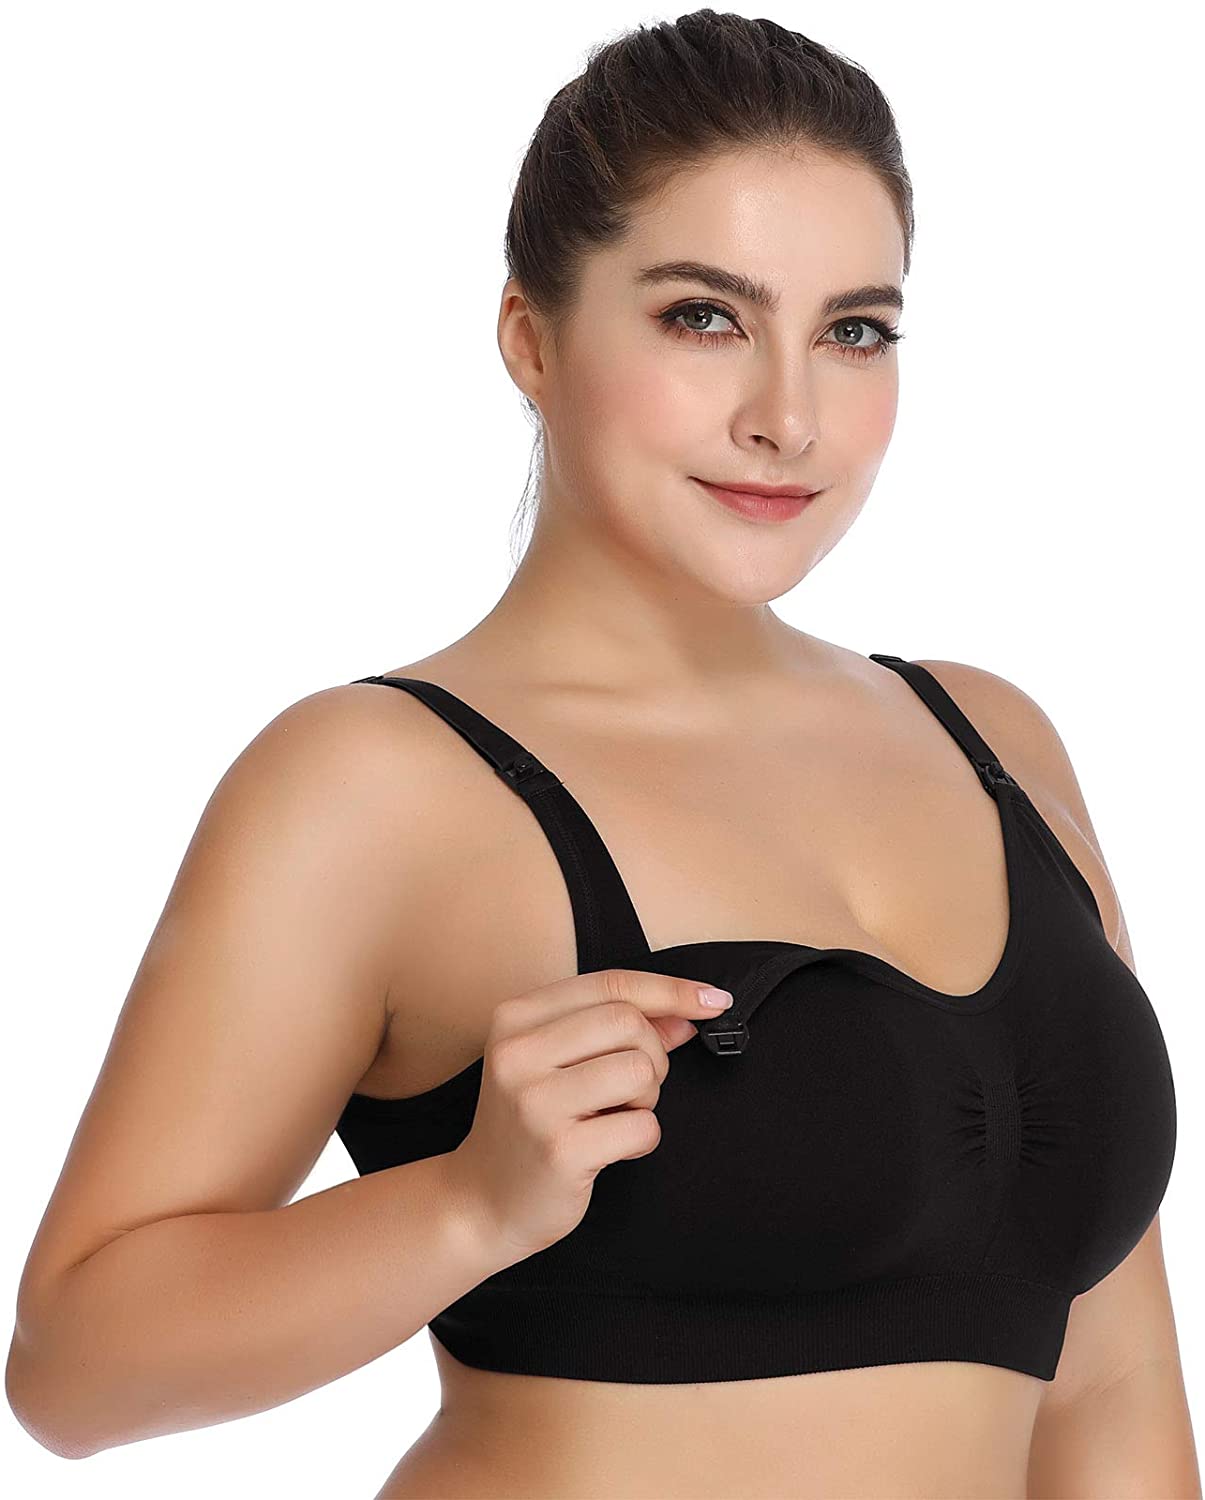 Every moms favorite nursing bra is now in a gorgeous new color